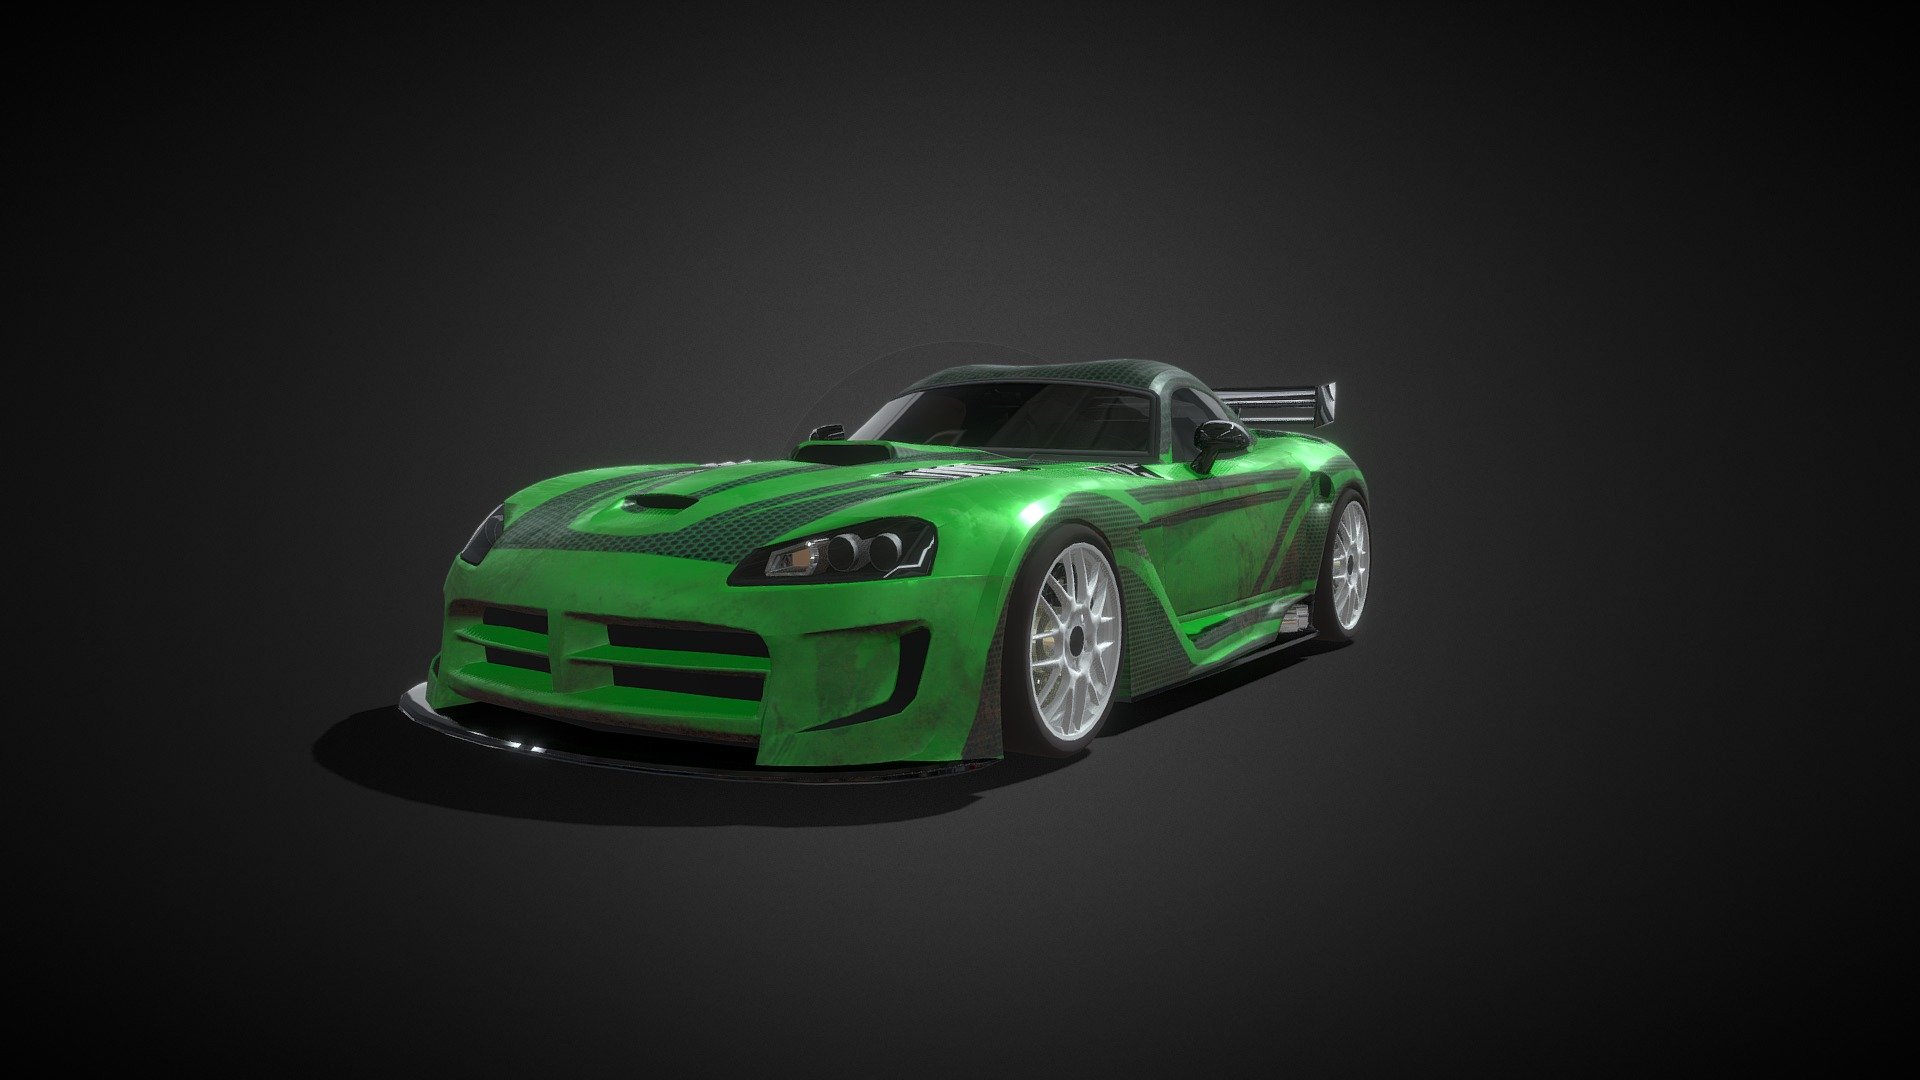 As a tribute and personal proyect I`m working on all NFS Most Wanted original blacklist cars. Hope you enjoy them!

You can see more about this project on https://www.artstation.com/m3dov 
Also you can follow my insta https://www.instagram.com/3dov_mxn/ - JV`S Viper NFSMW - Download Free 3D model by memoov (@movartD) 3d model